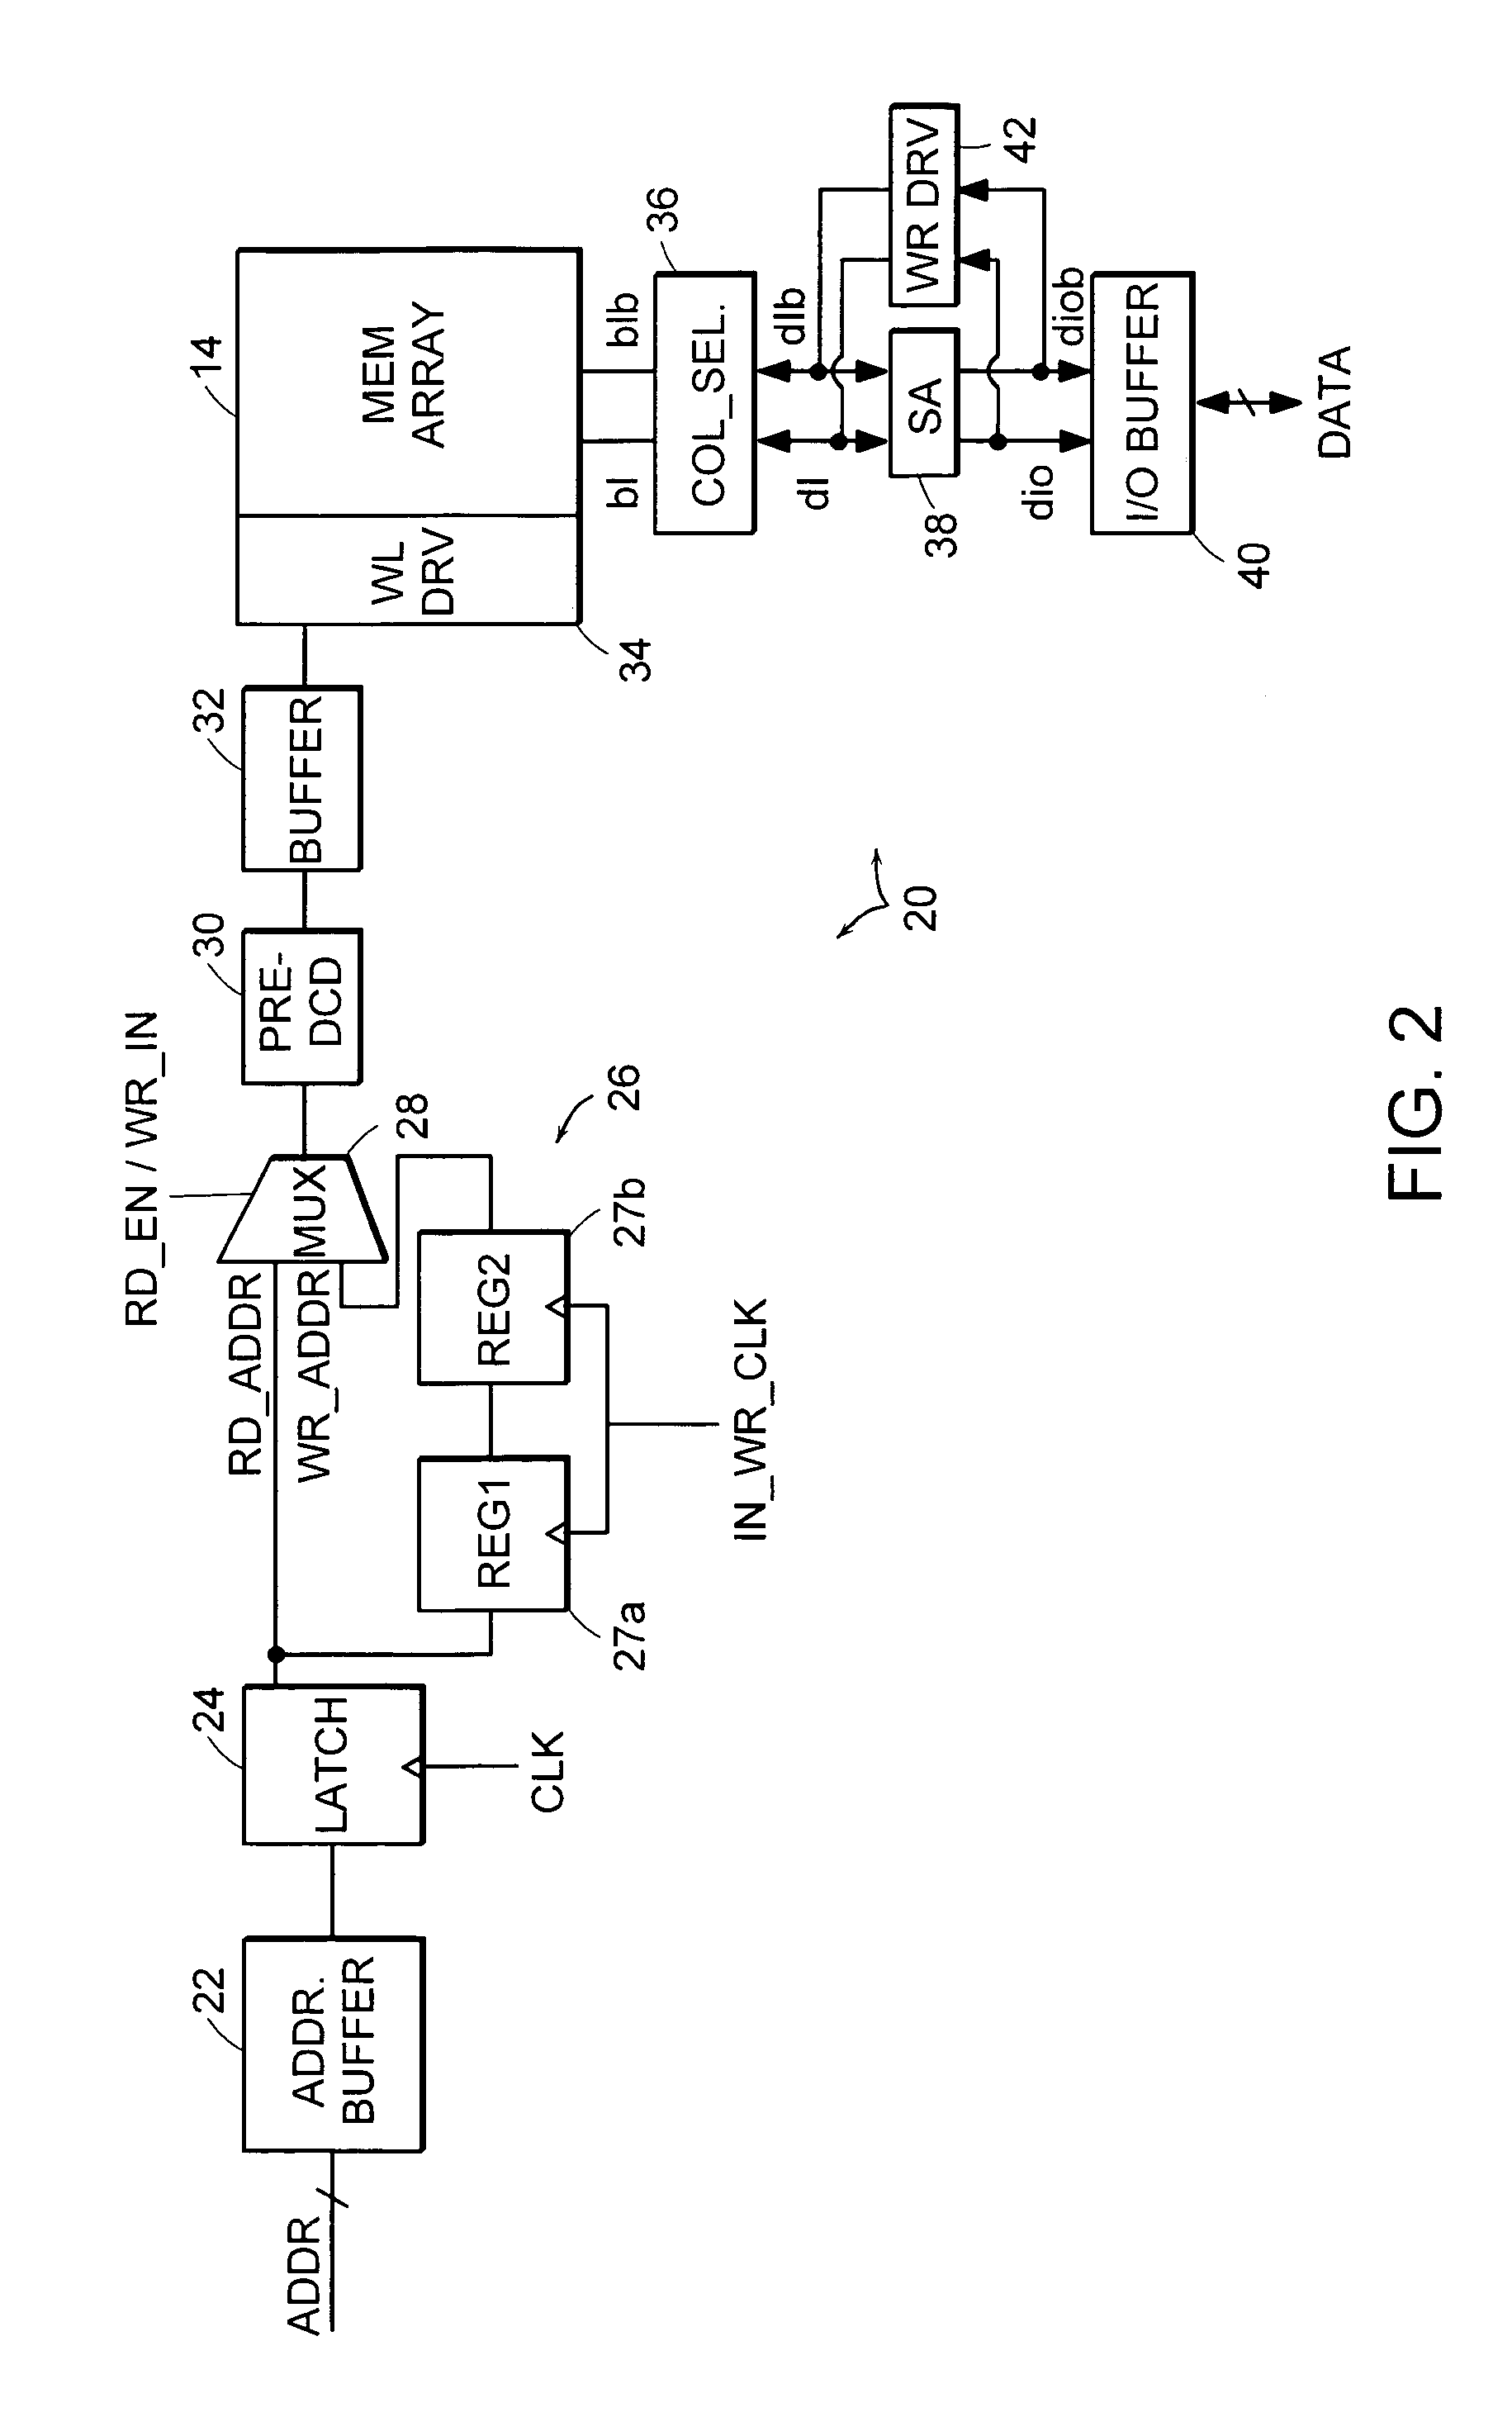 Memory interface system and method for reducing cycle time of sequential read and write accesses using separate address and data buses